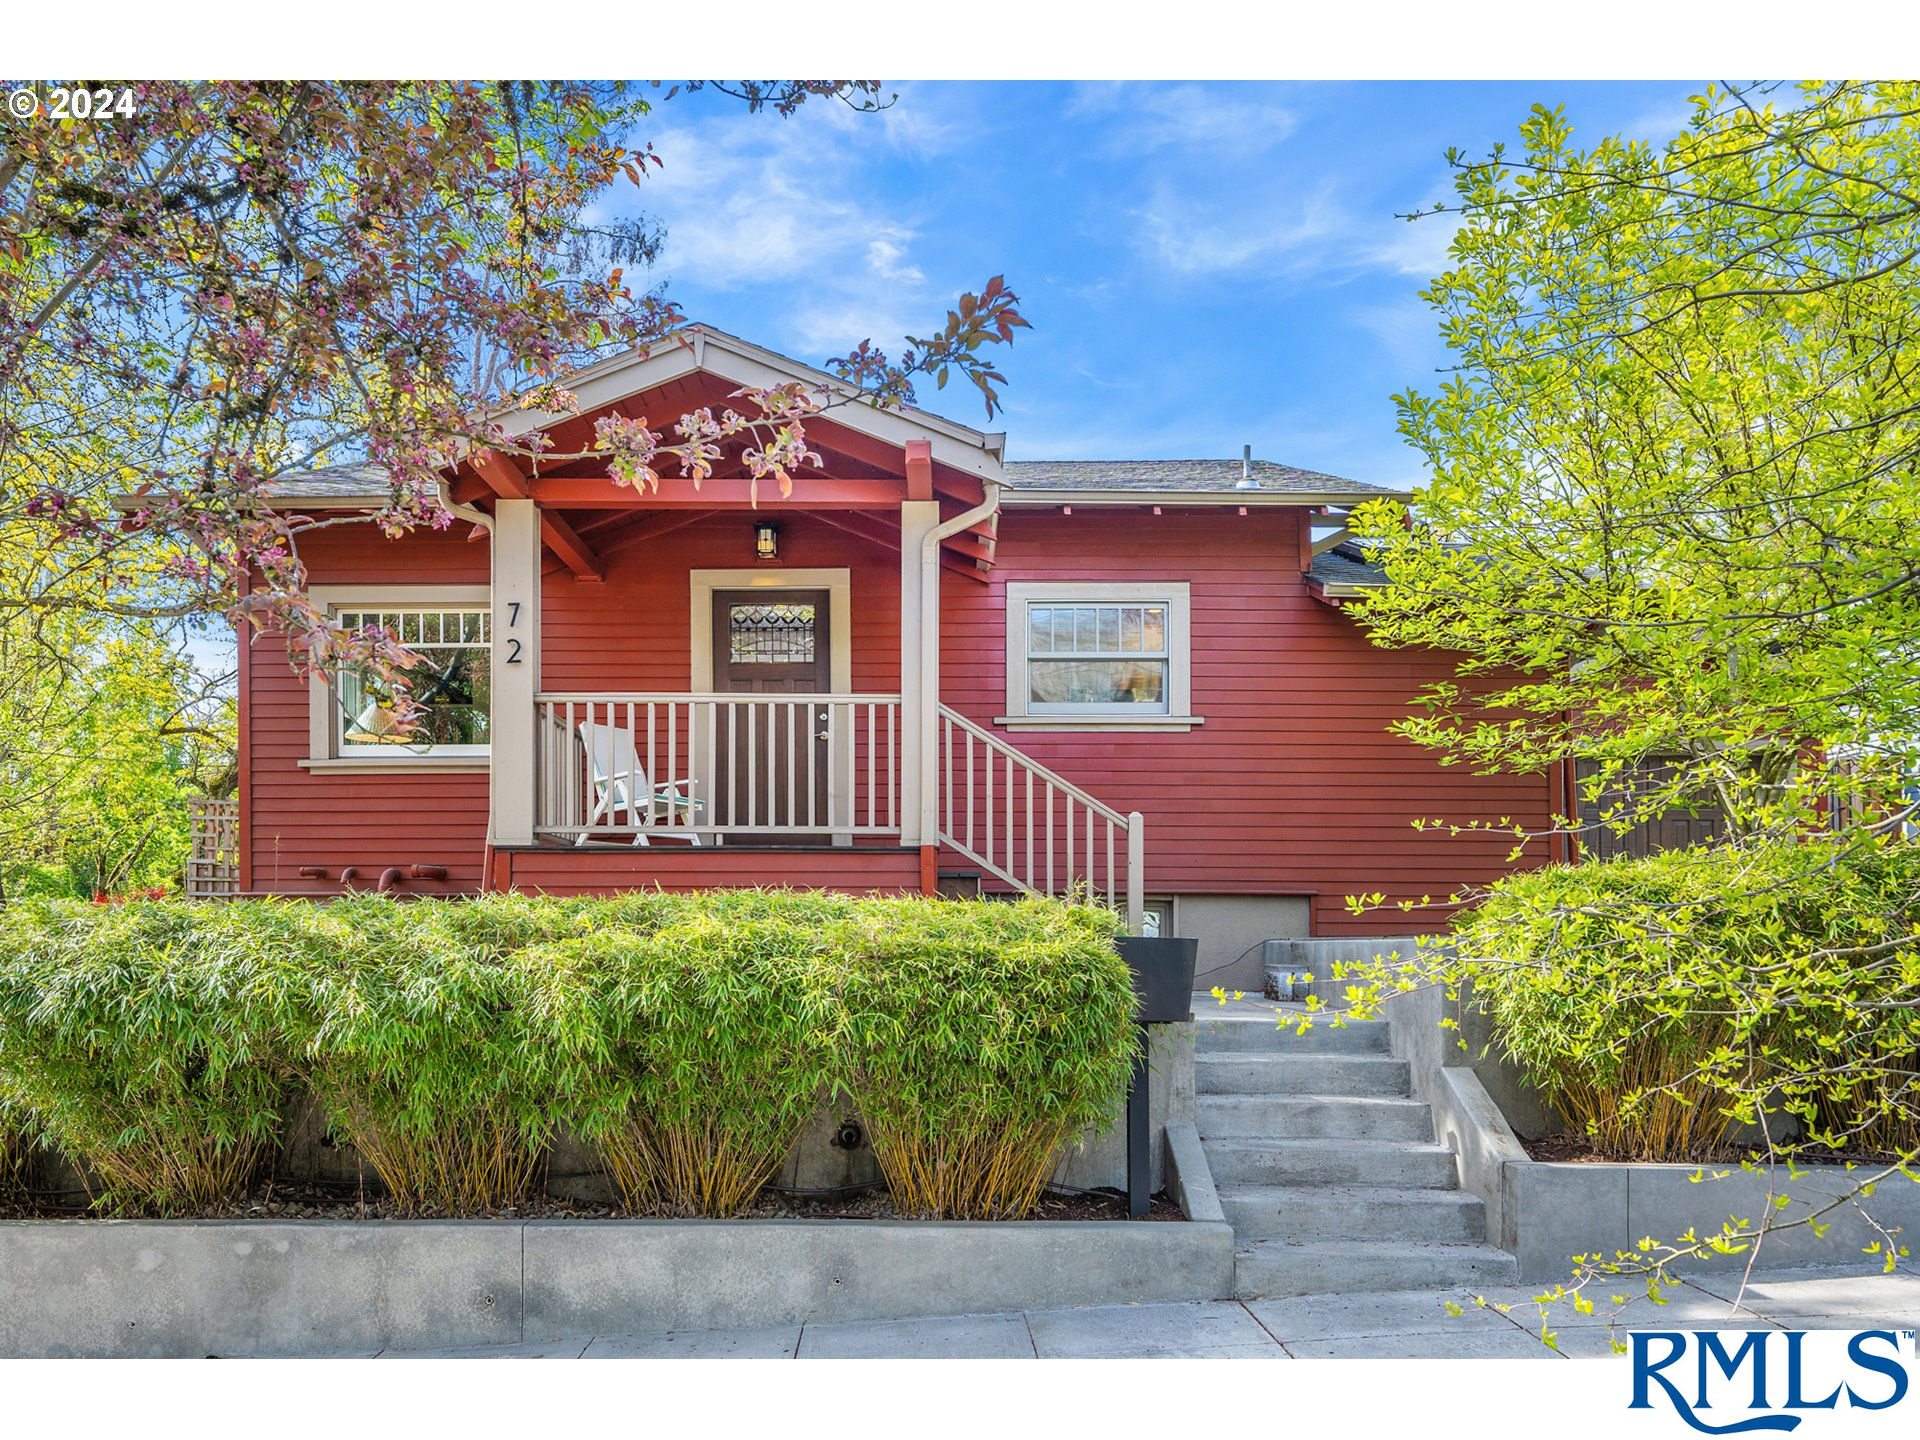 72 S Whitaker St, Portland, OR 97239